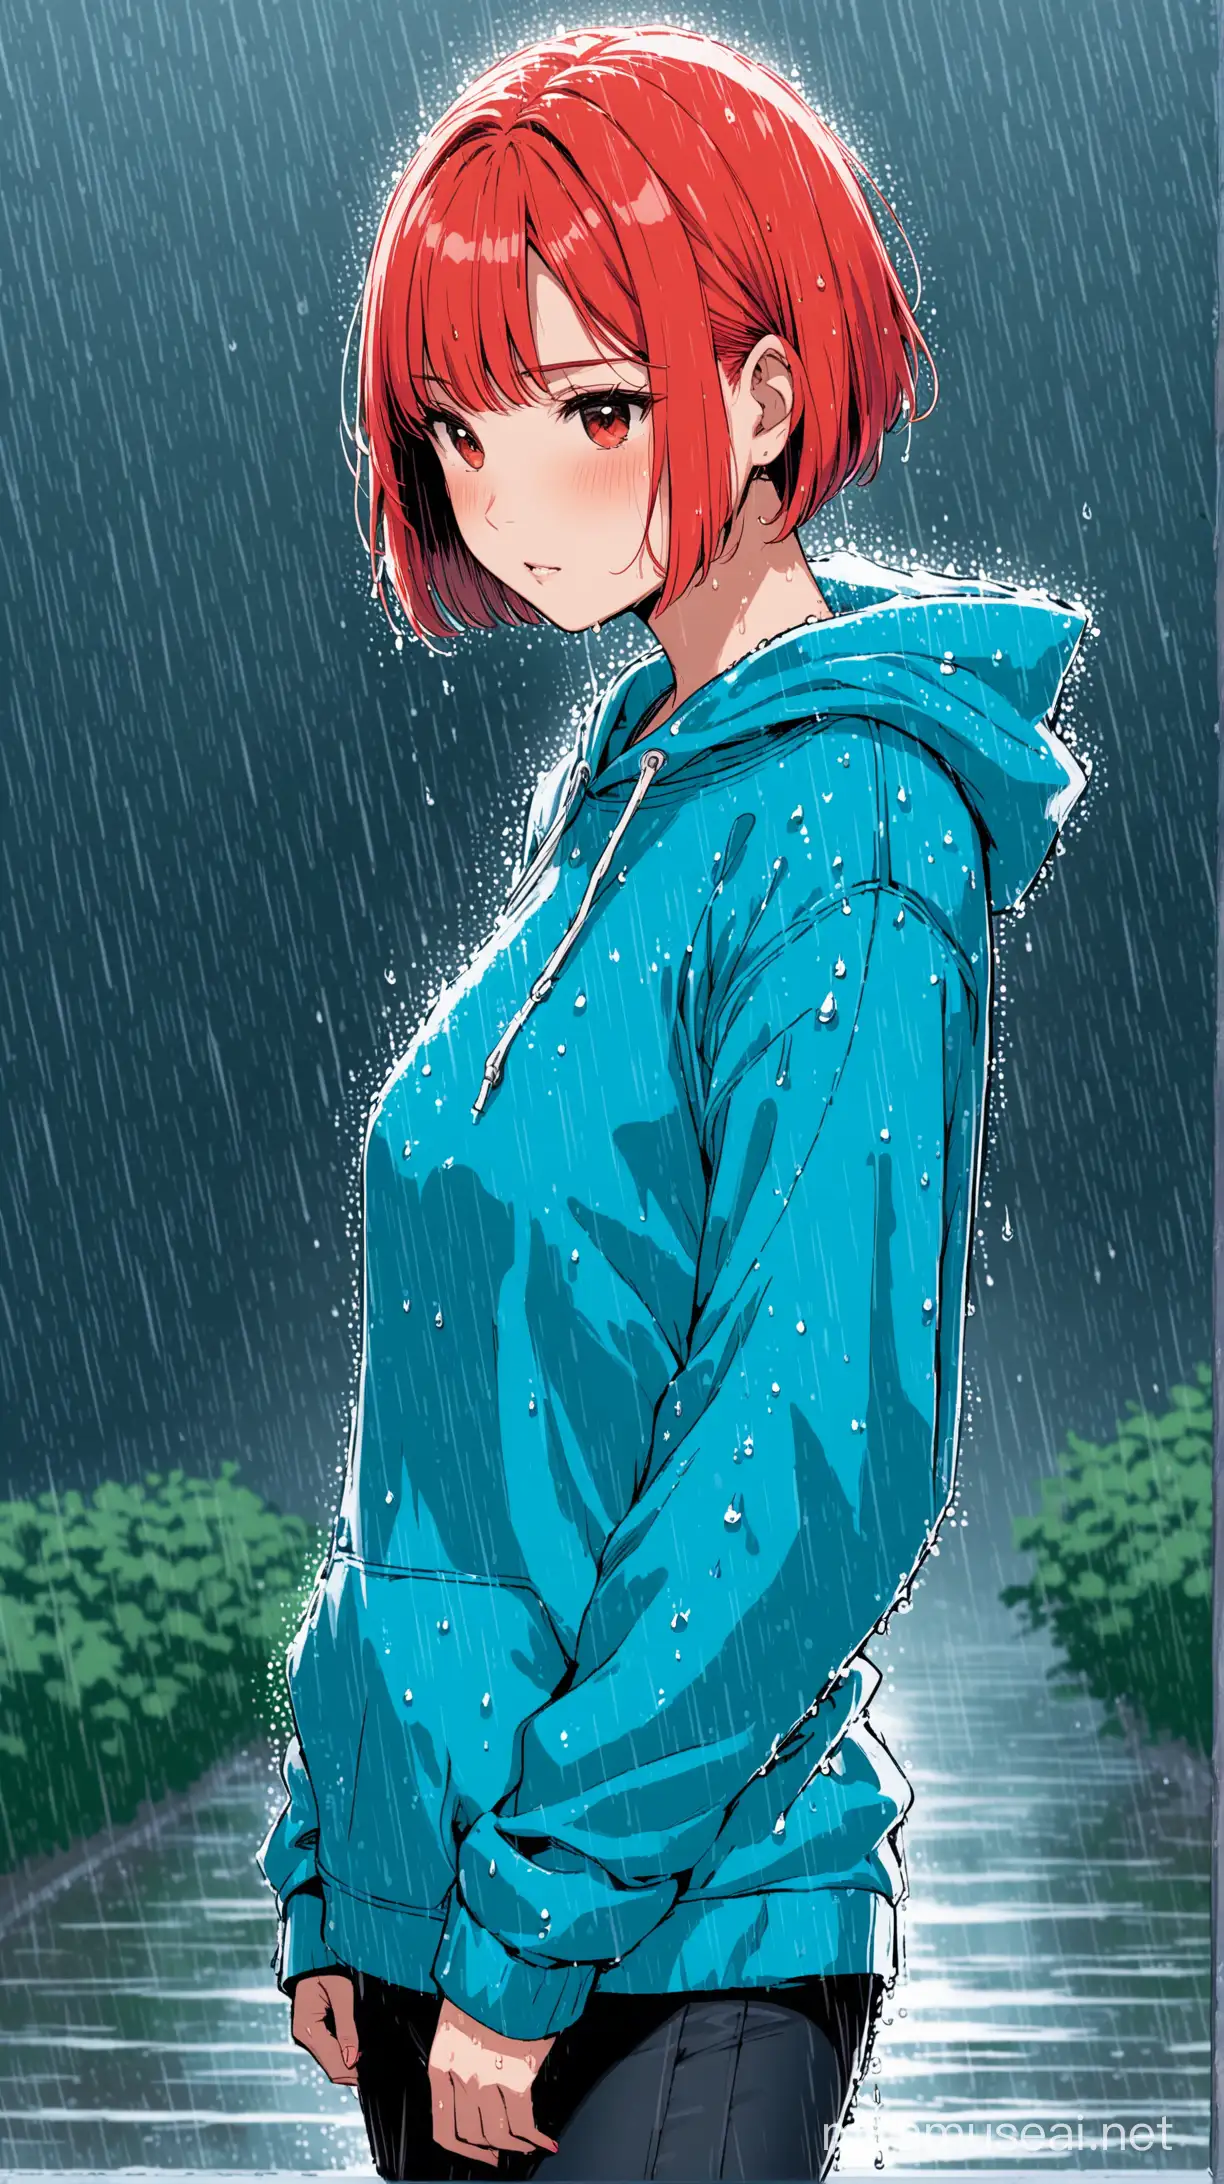 Draw a woman with short red hair cut wearing à blue sweat-shirt in the rain